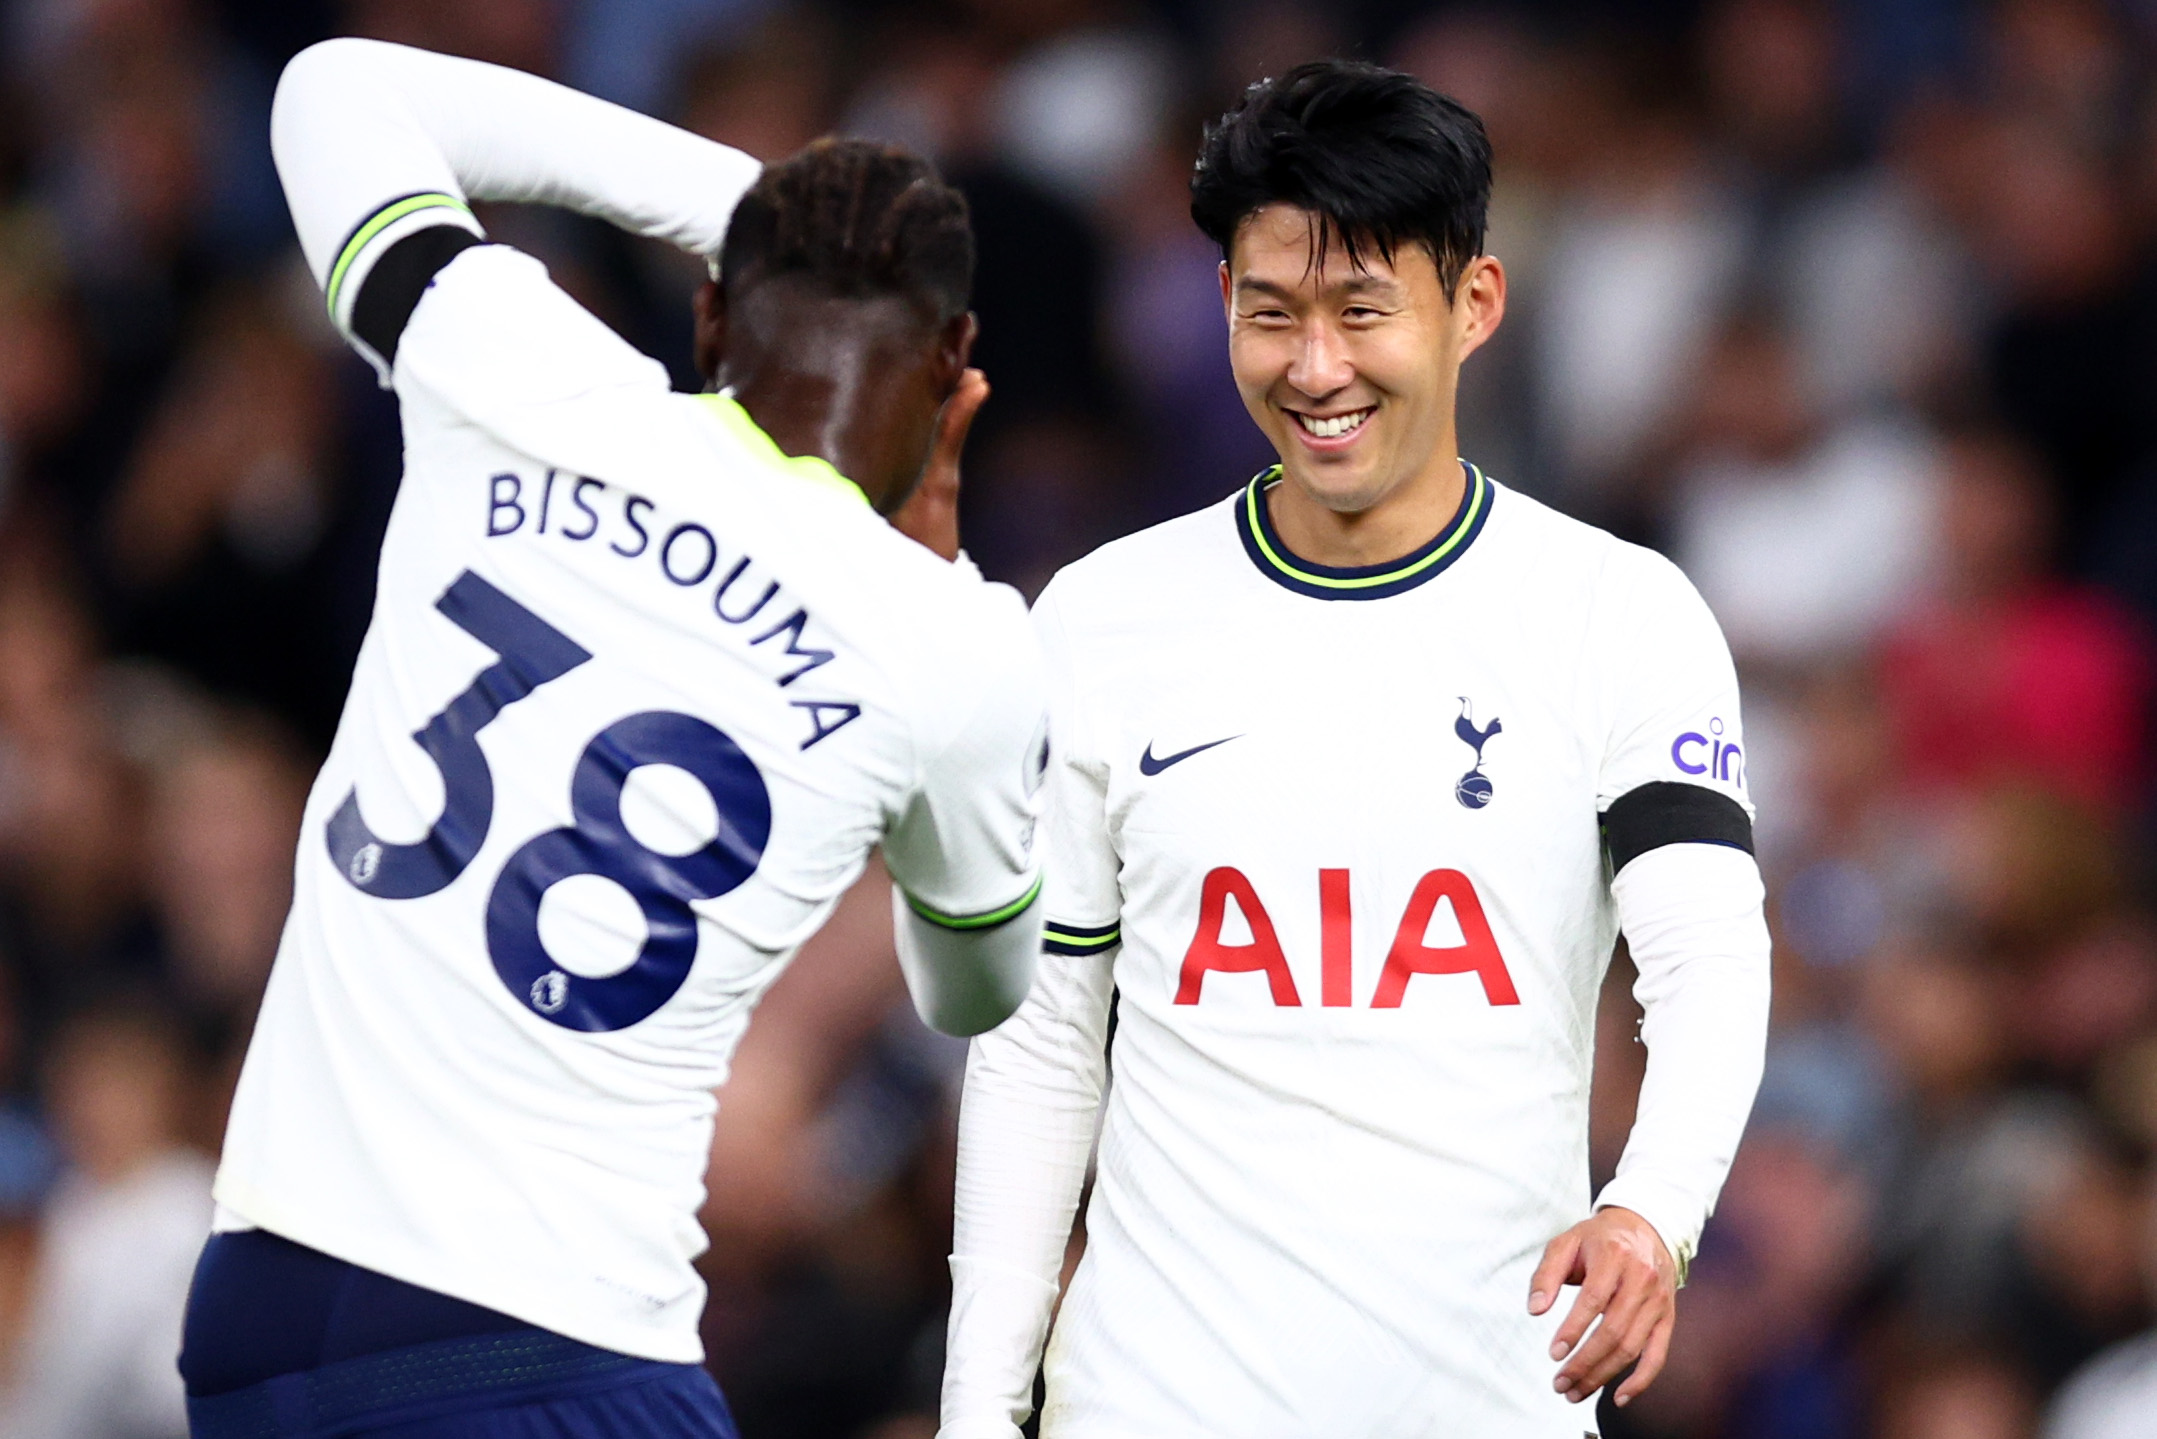 Peter Crouch is surprised that Son Heung-Min is still at Tottenham Hotspur.